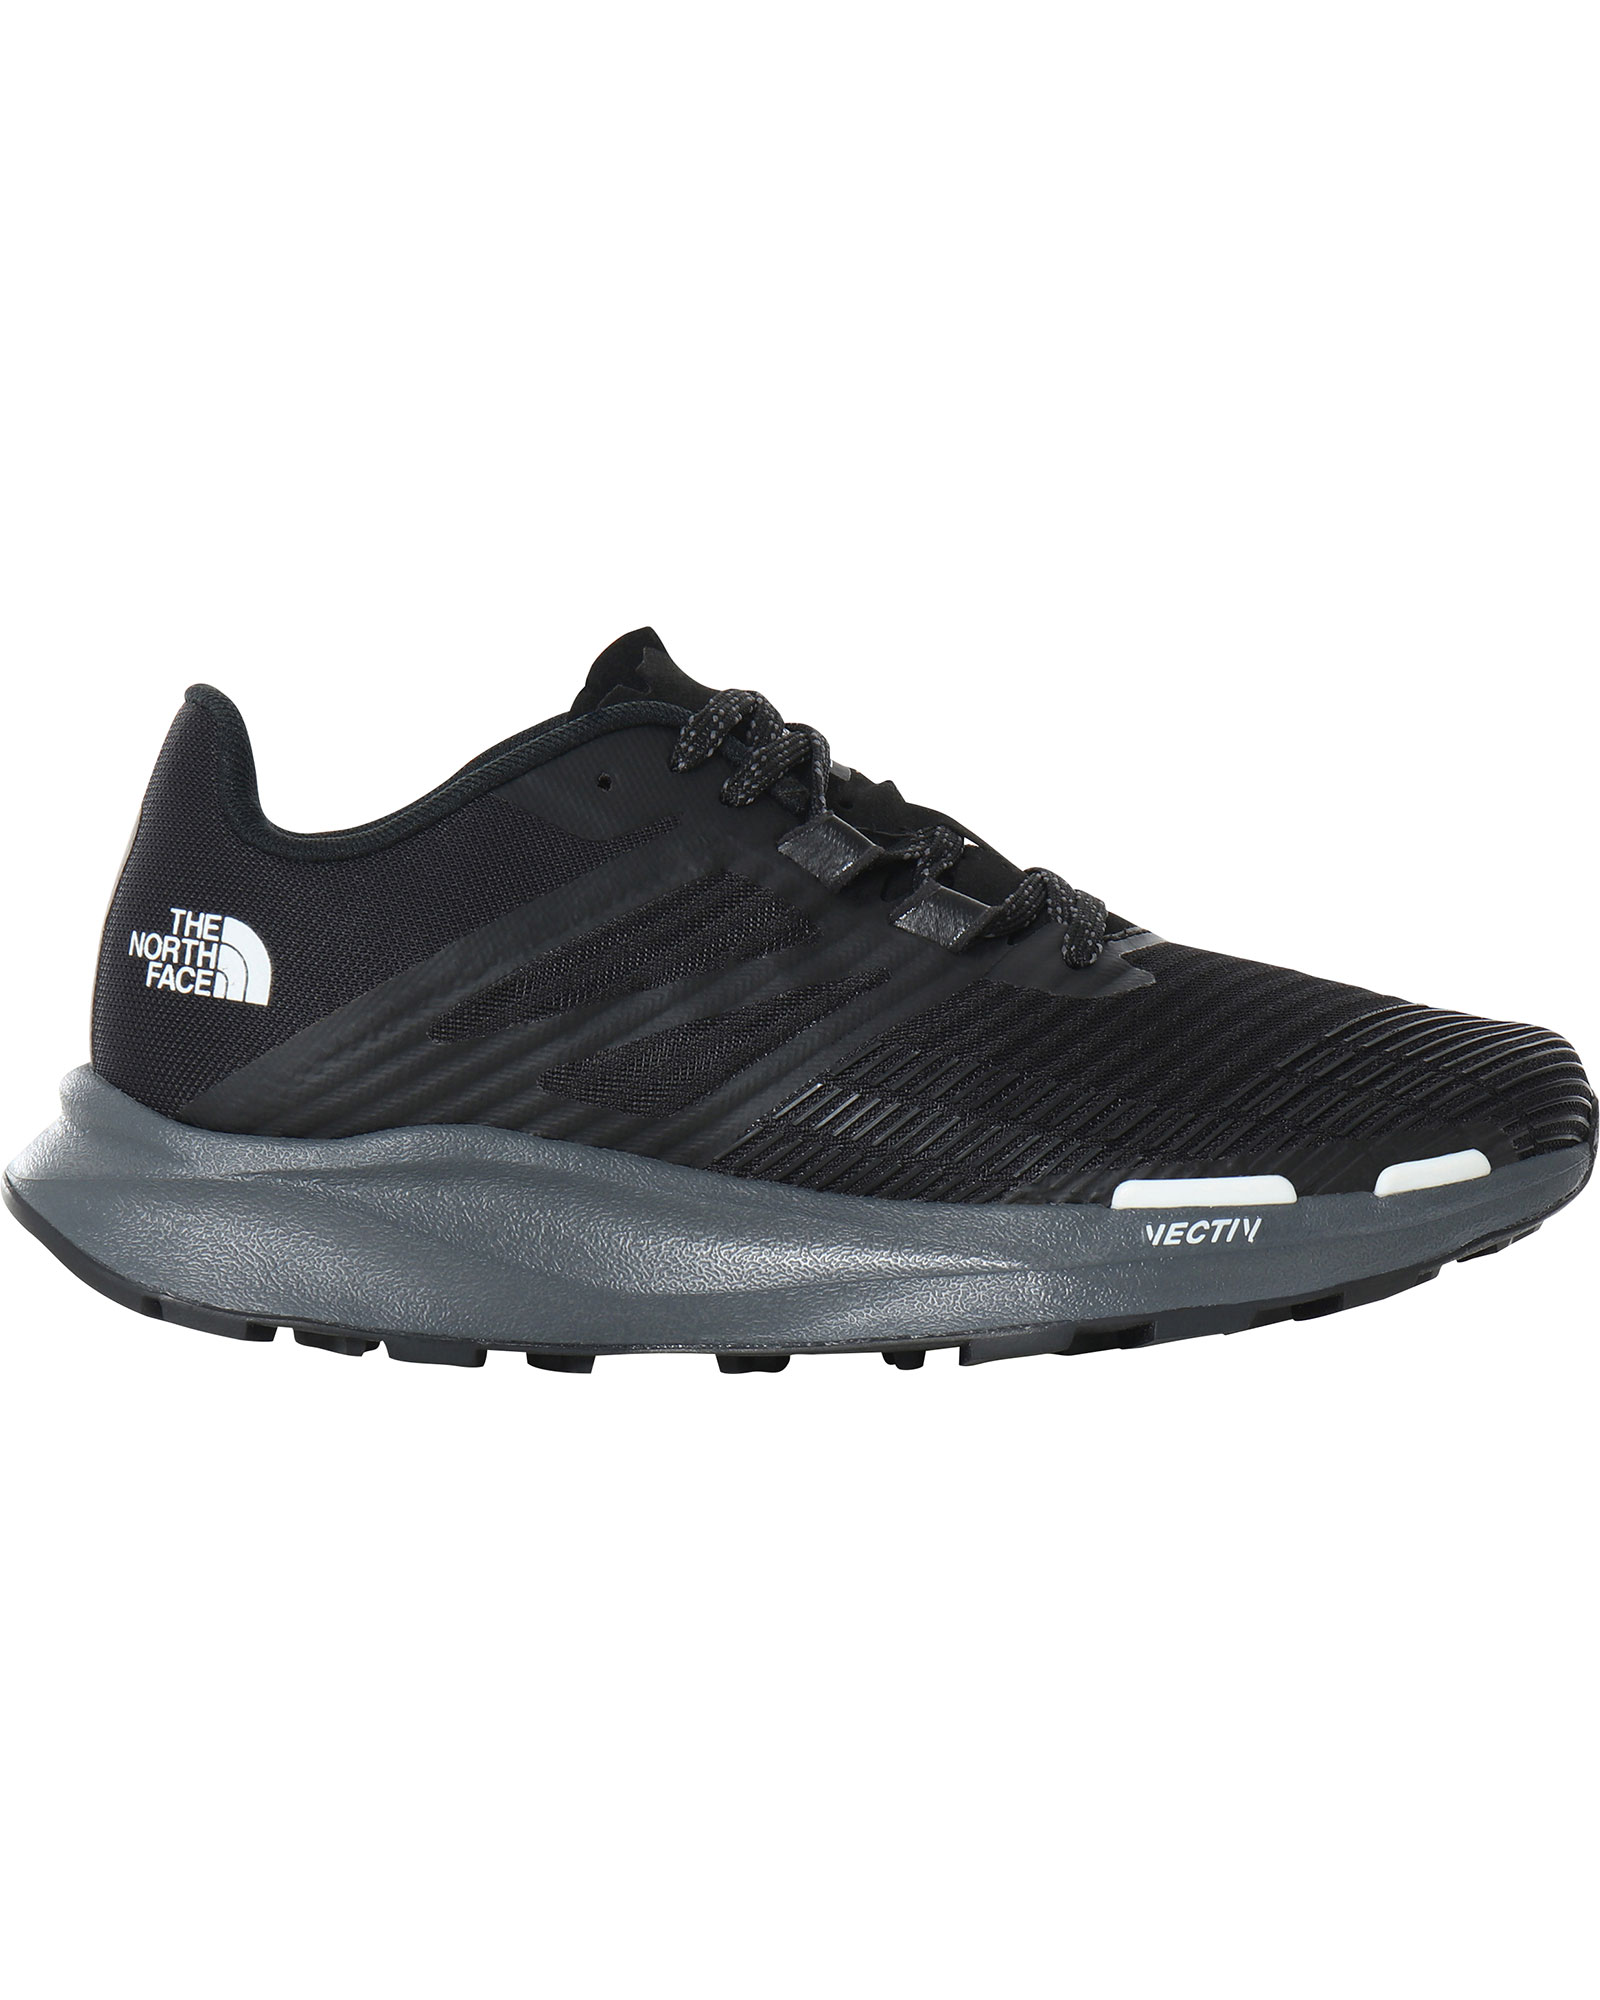 The North Face Vectiv Eminus Womens Trail Shoes